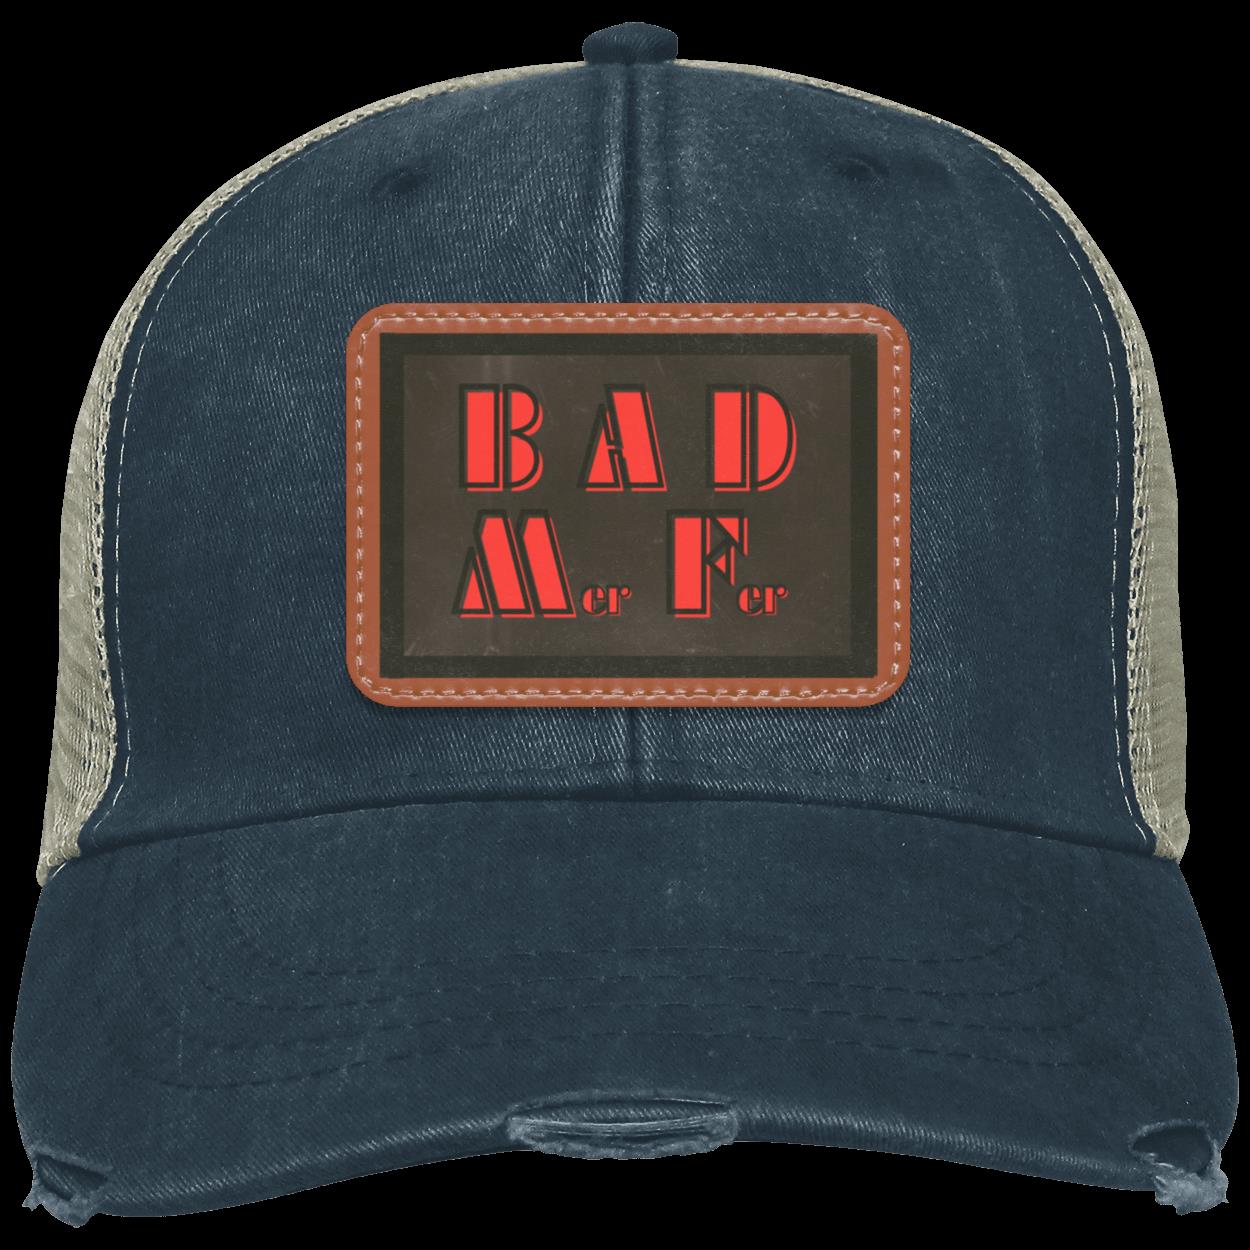 "BAD M-er  F-er" Distressed Snap Back , Trucker Hat, Tan and Gray Patch